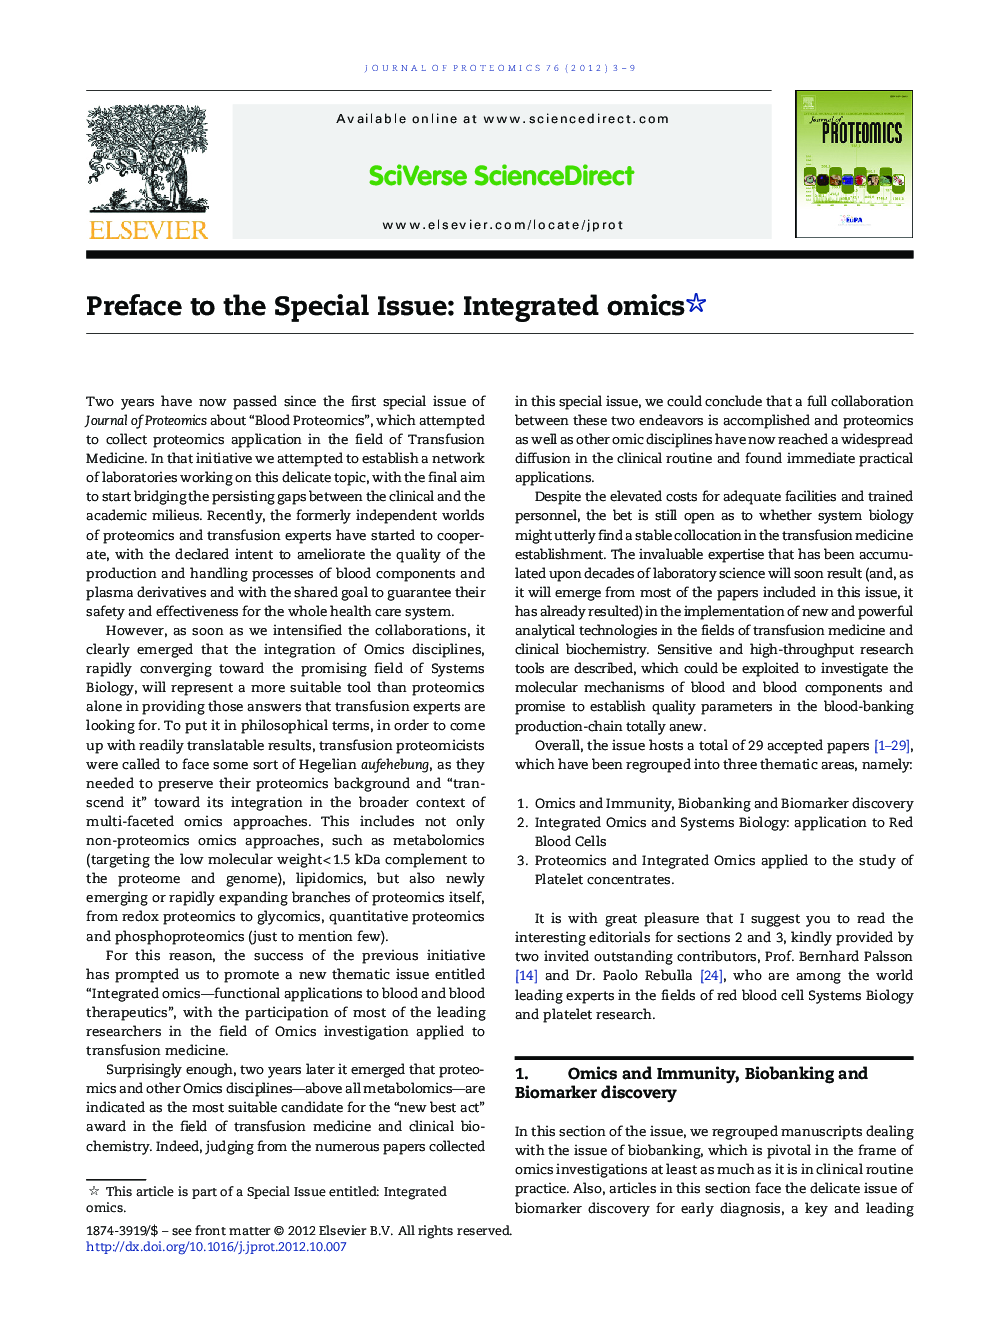 Preface to the Special Issue: Integrated omics